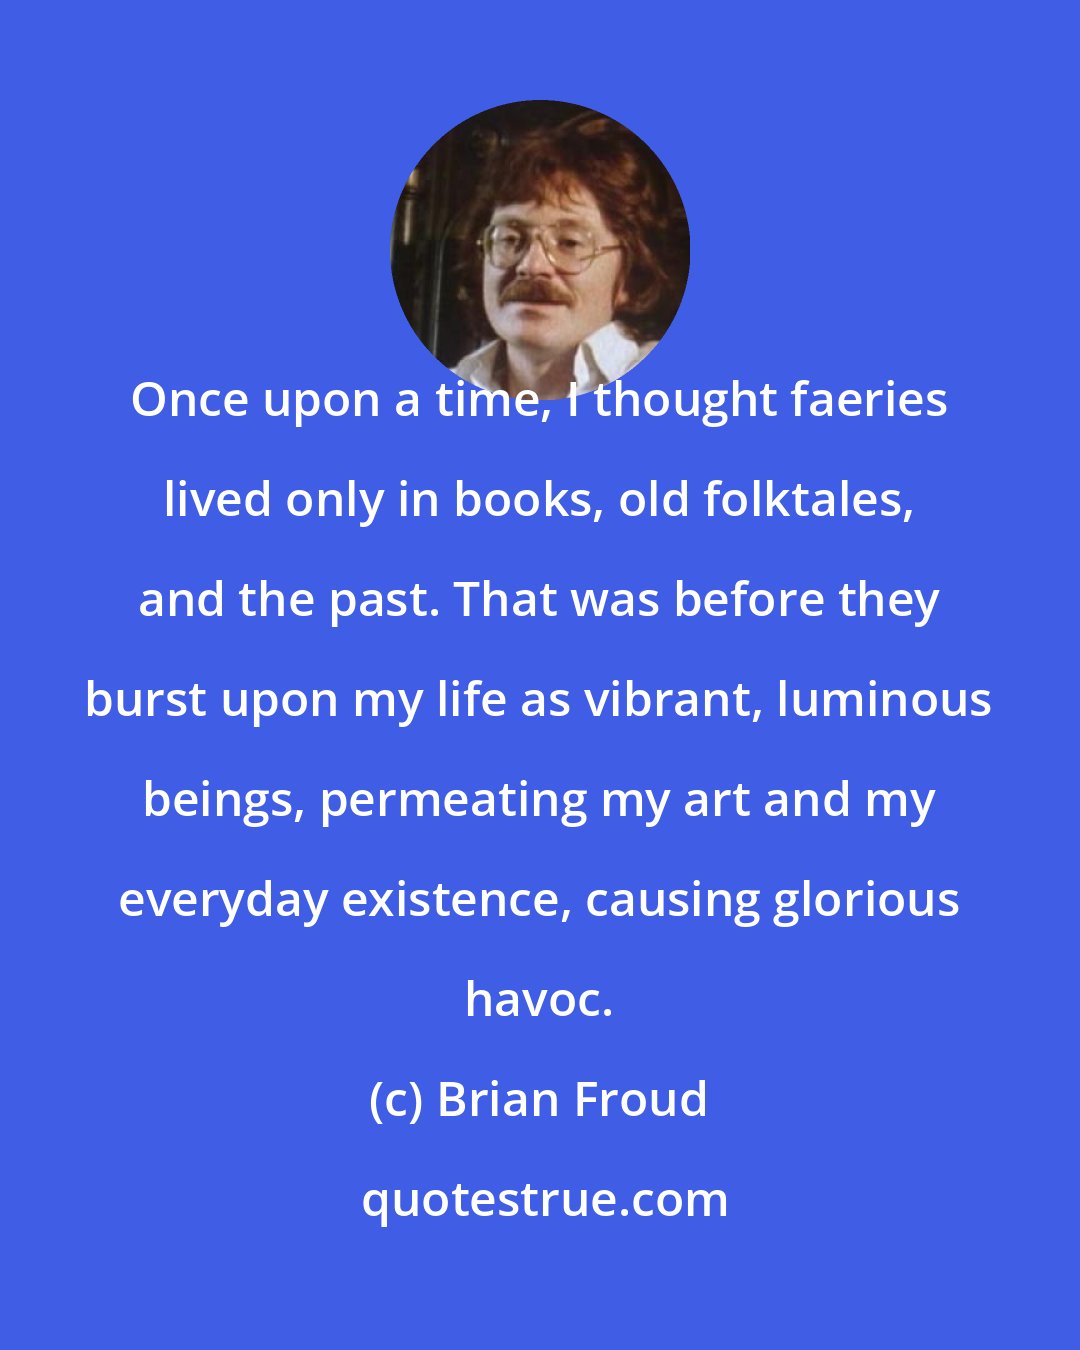 Brian Froud: Once upon a time, I thought faeries lived only in books, old folktales, and the past. That was before they burst upon my life as vibrant, luminous beings, permeating my art and my everyday existence, causing glorious havoc.